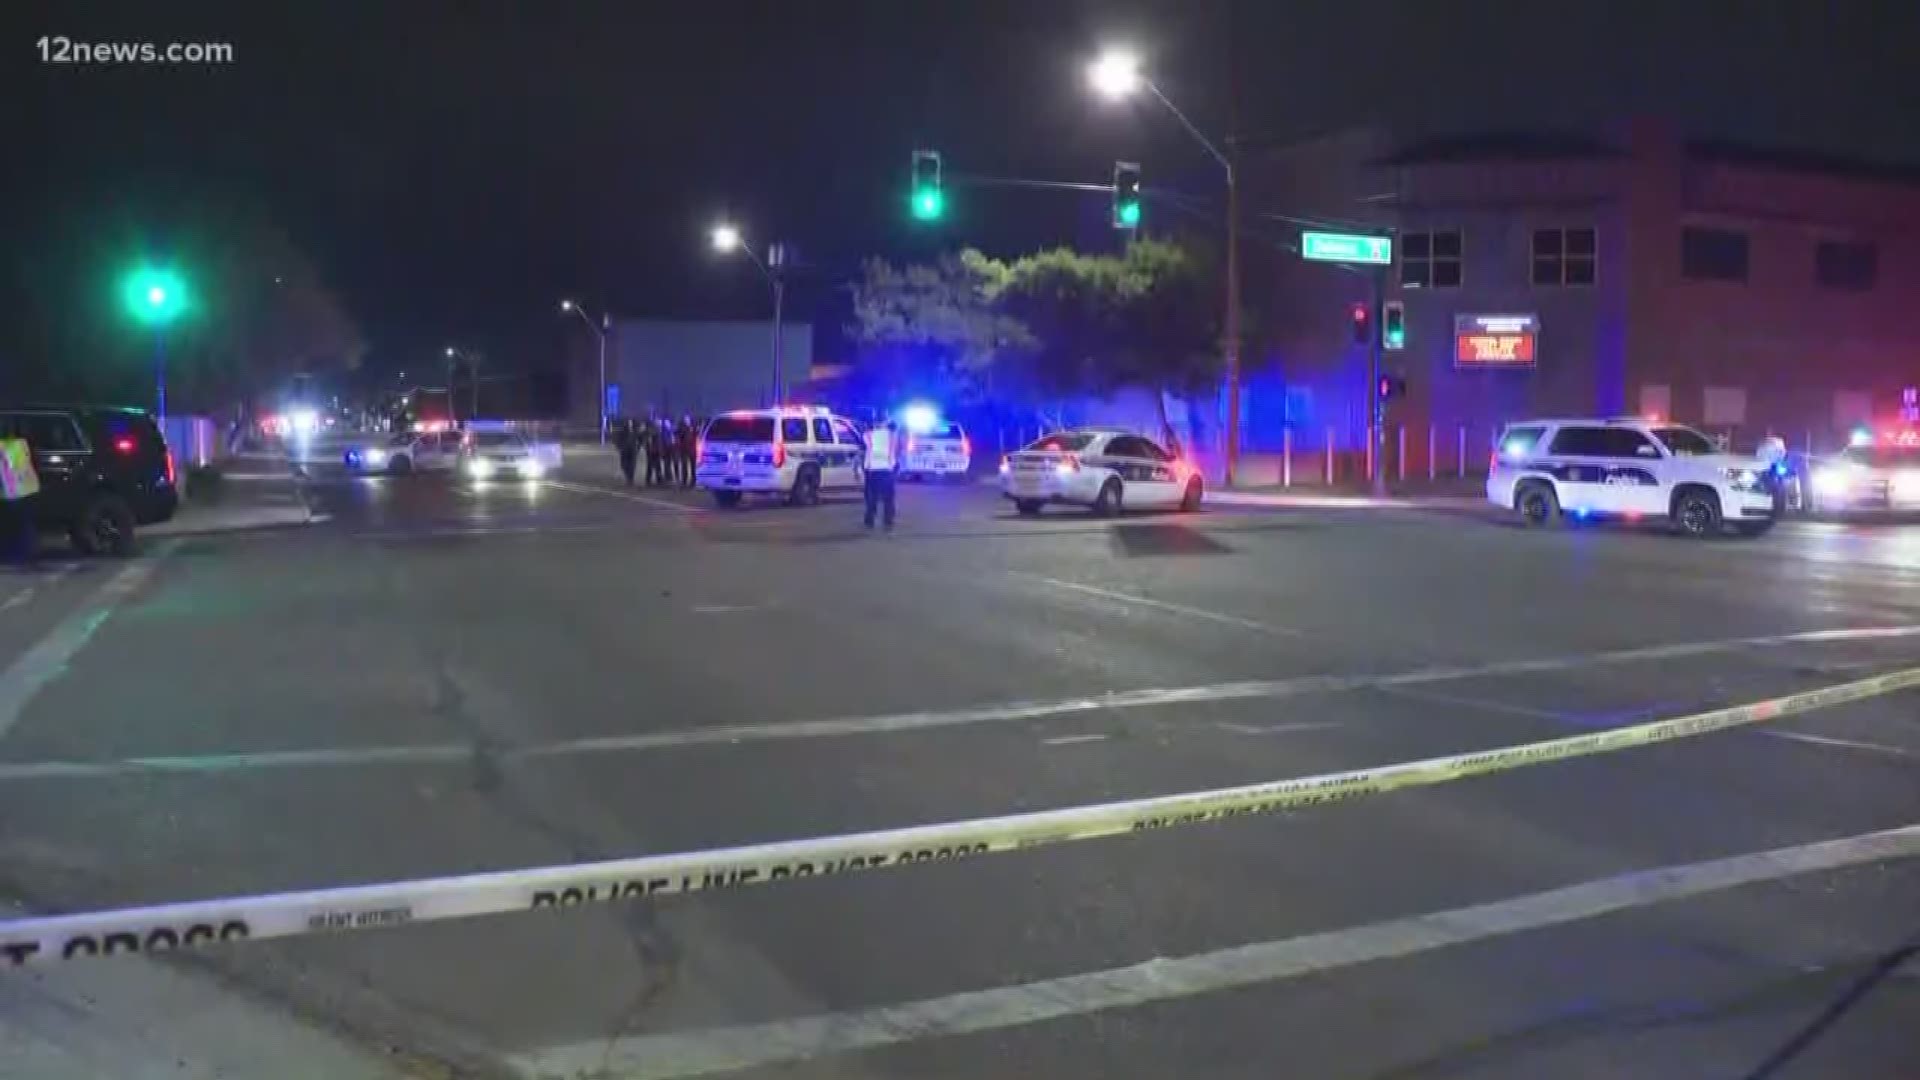 Phoenix police said one person was killed and two others were injured in a shooting Thursday night at an apartment complex near 69th Avenue and Indian School Road.